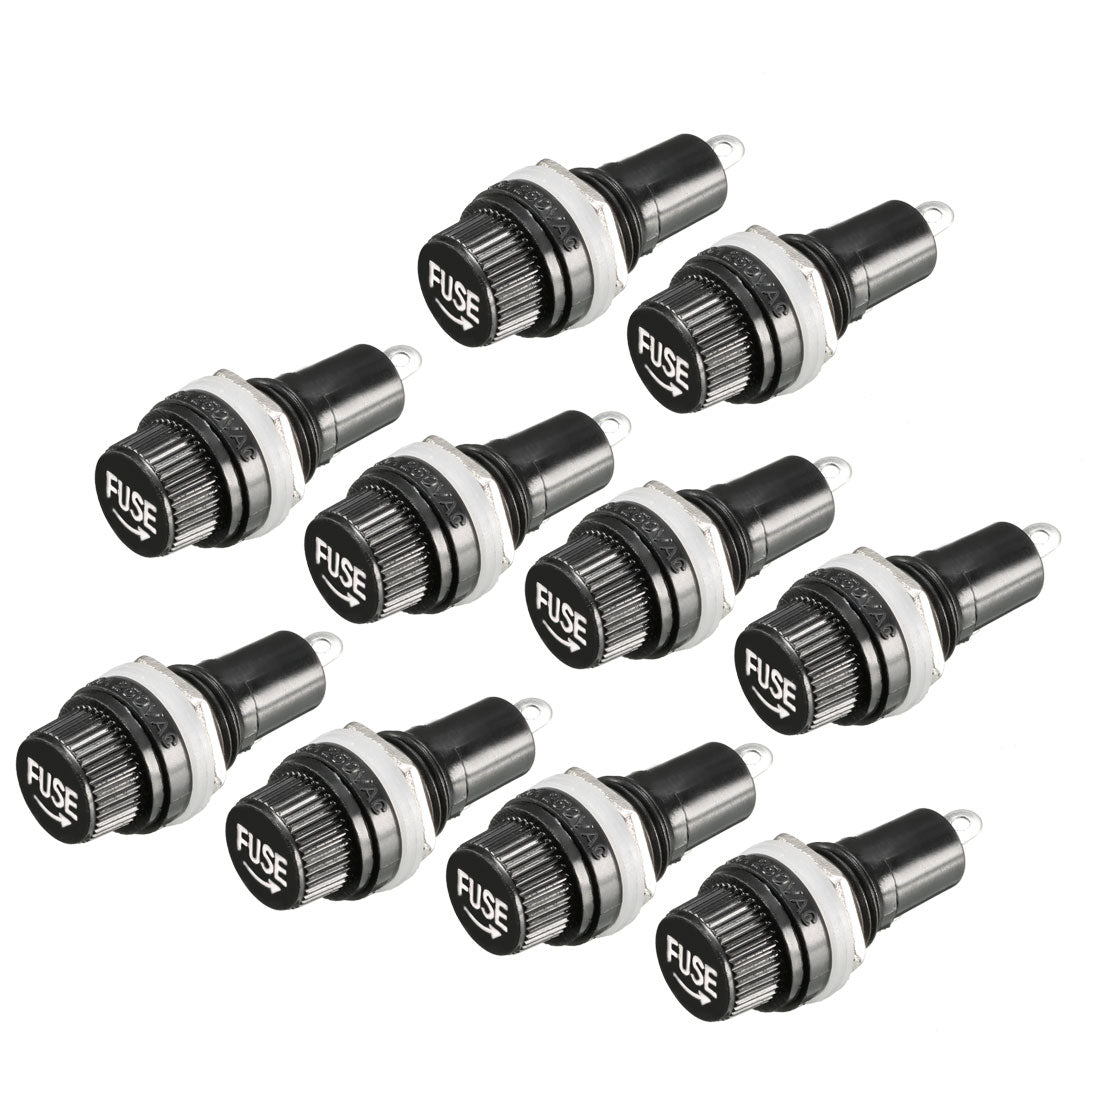 uxcell Uxcell 10pcs AC 10A 250V 5mm x 20mm Black Electrical Panel Mounted Screw Cap Fuse Holder